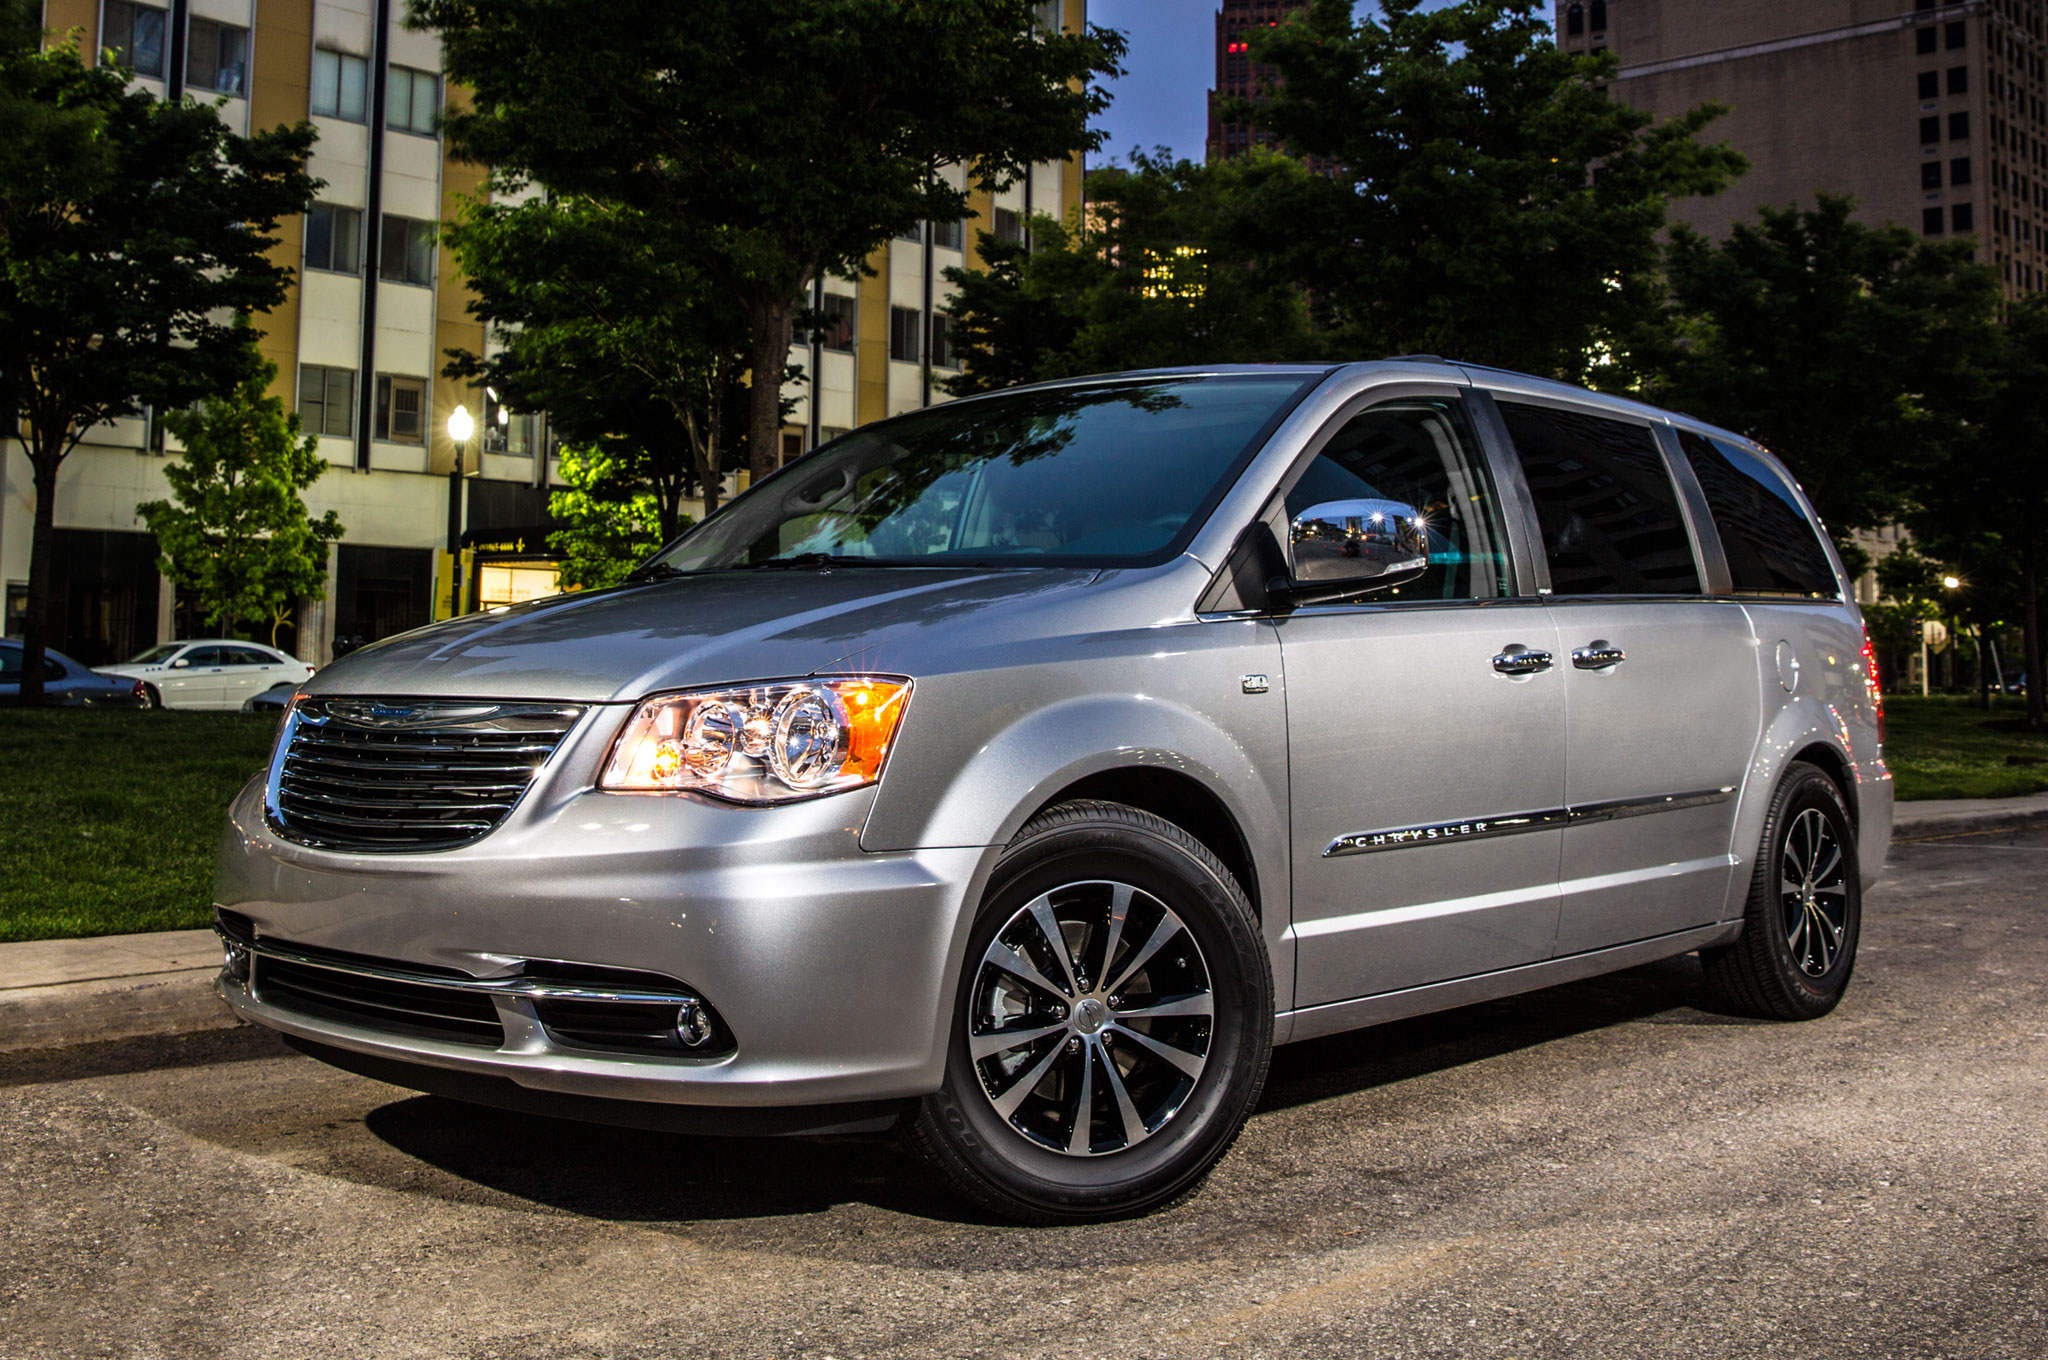 Chrysler town and country lease price #1